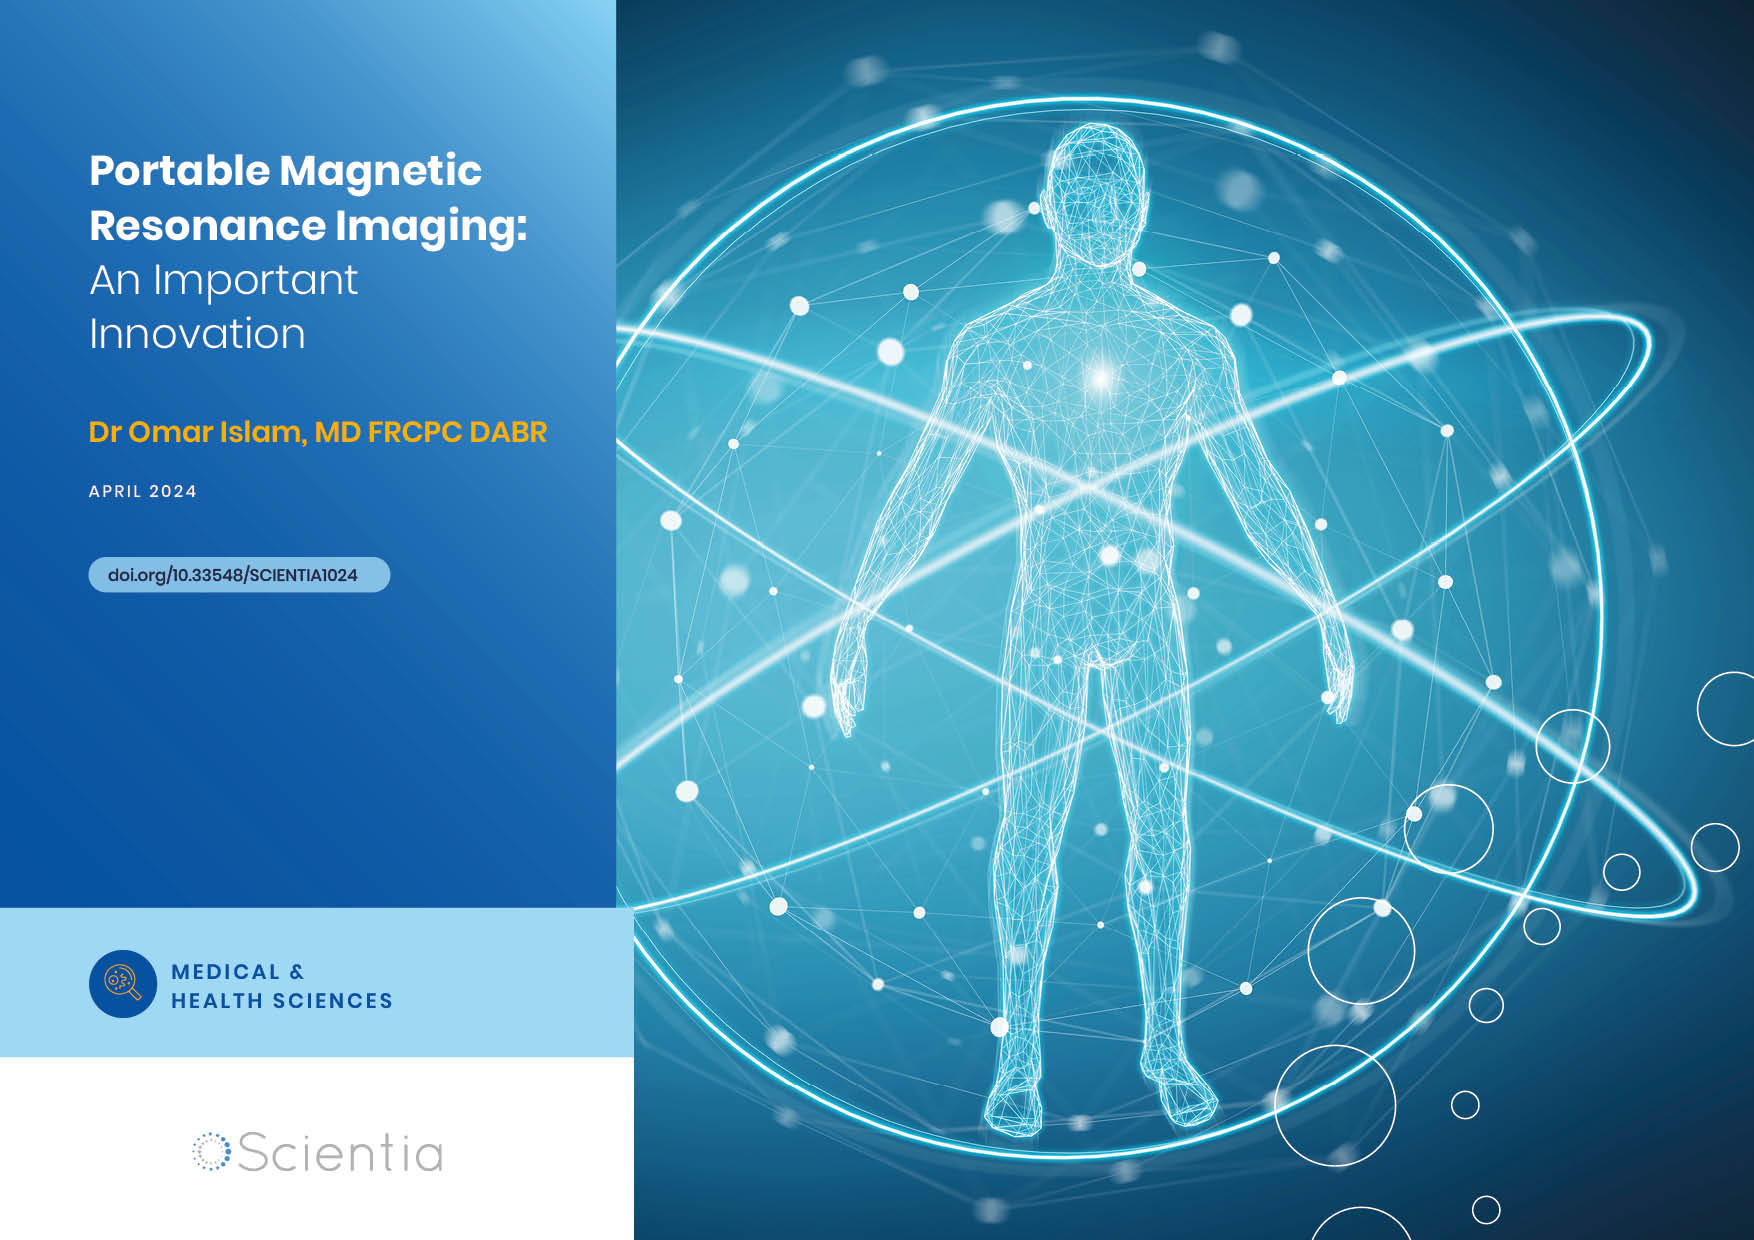 Dr Omar Islam | Portable Magnetic Resonance Imaging: An Important Innovation